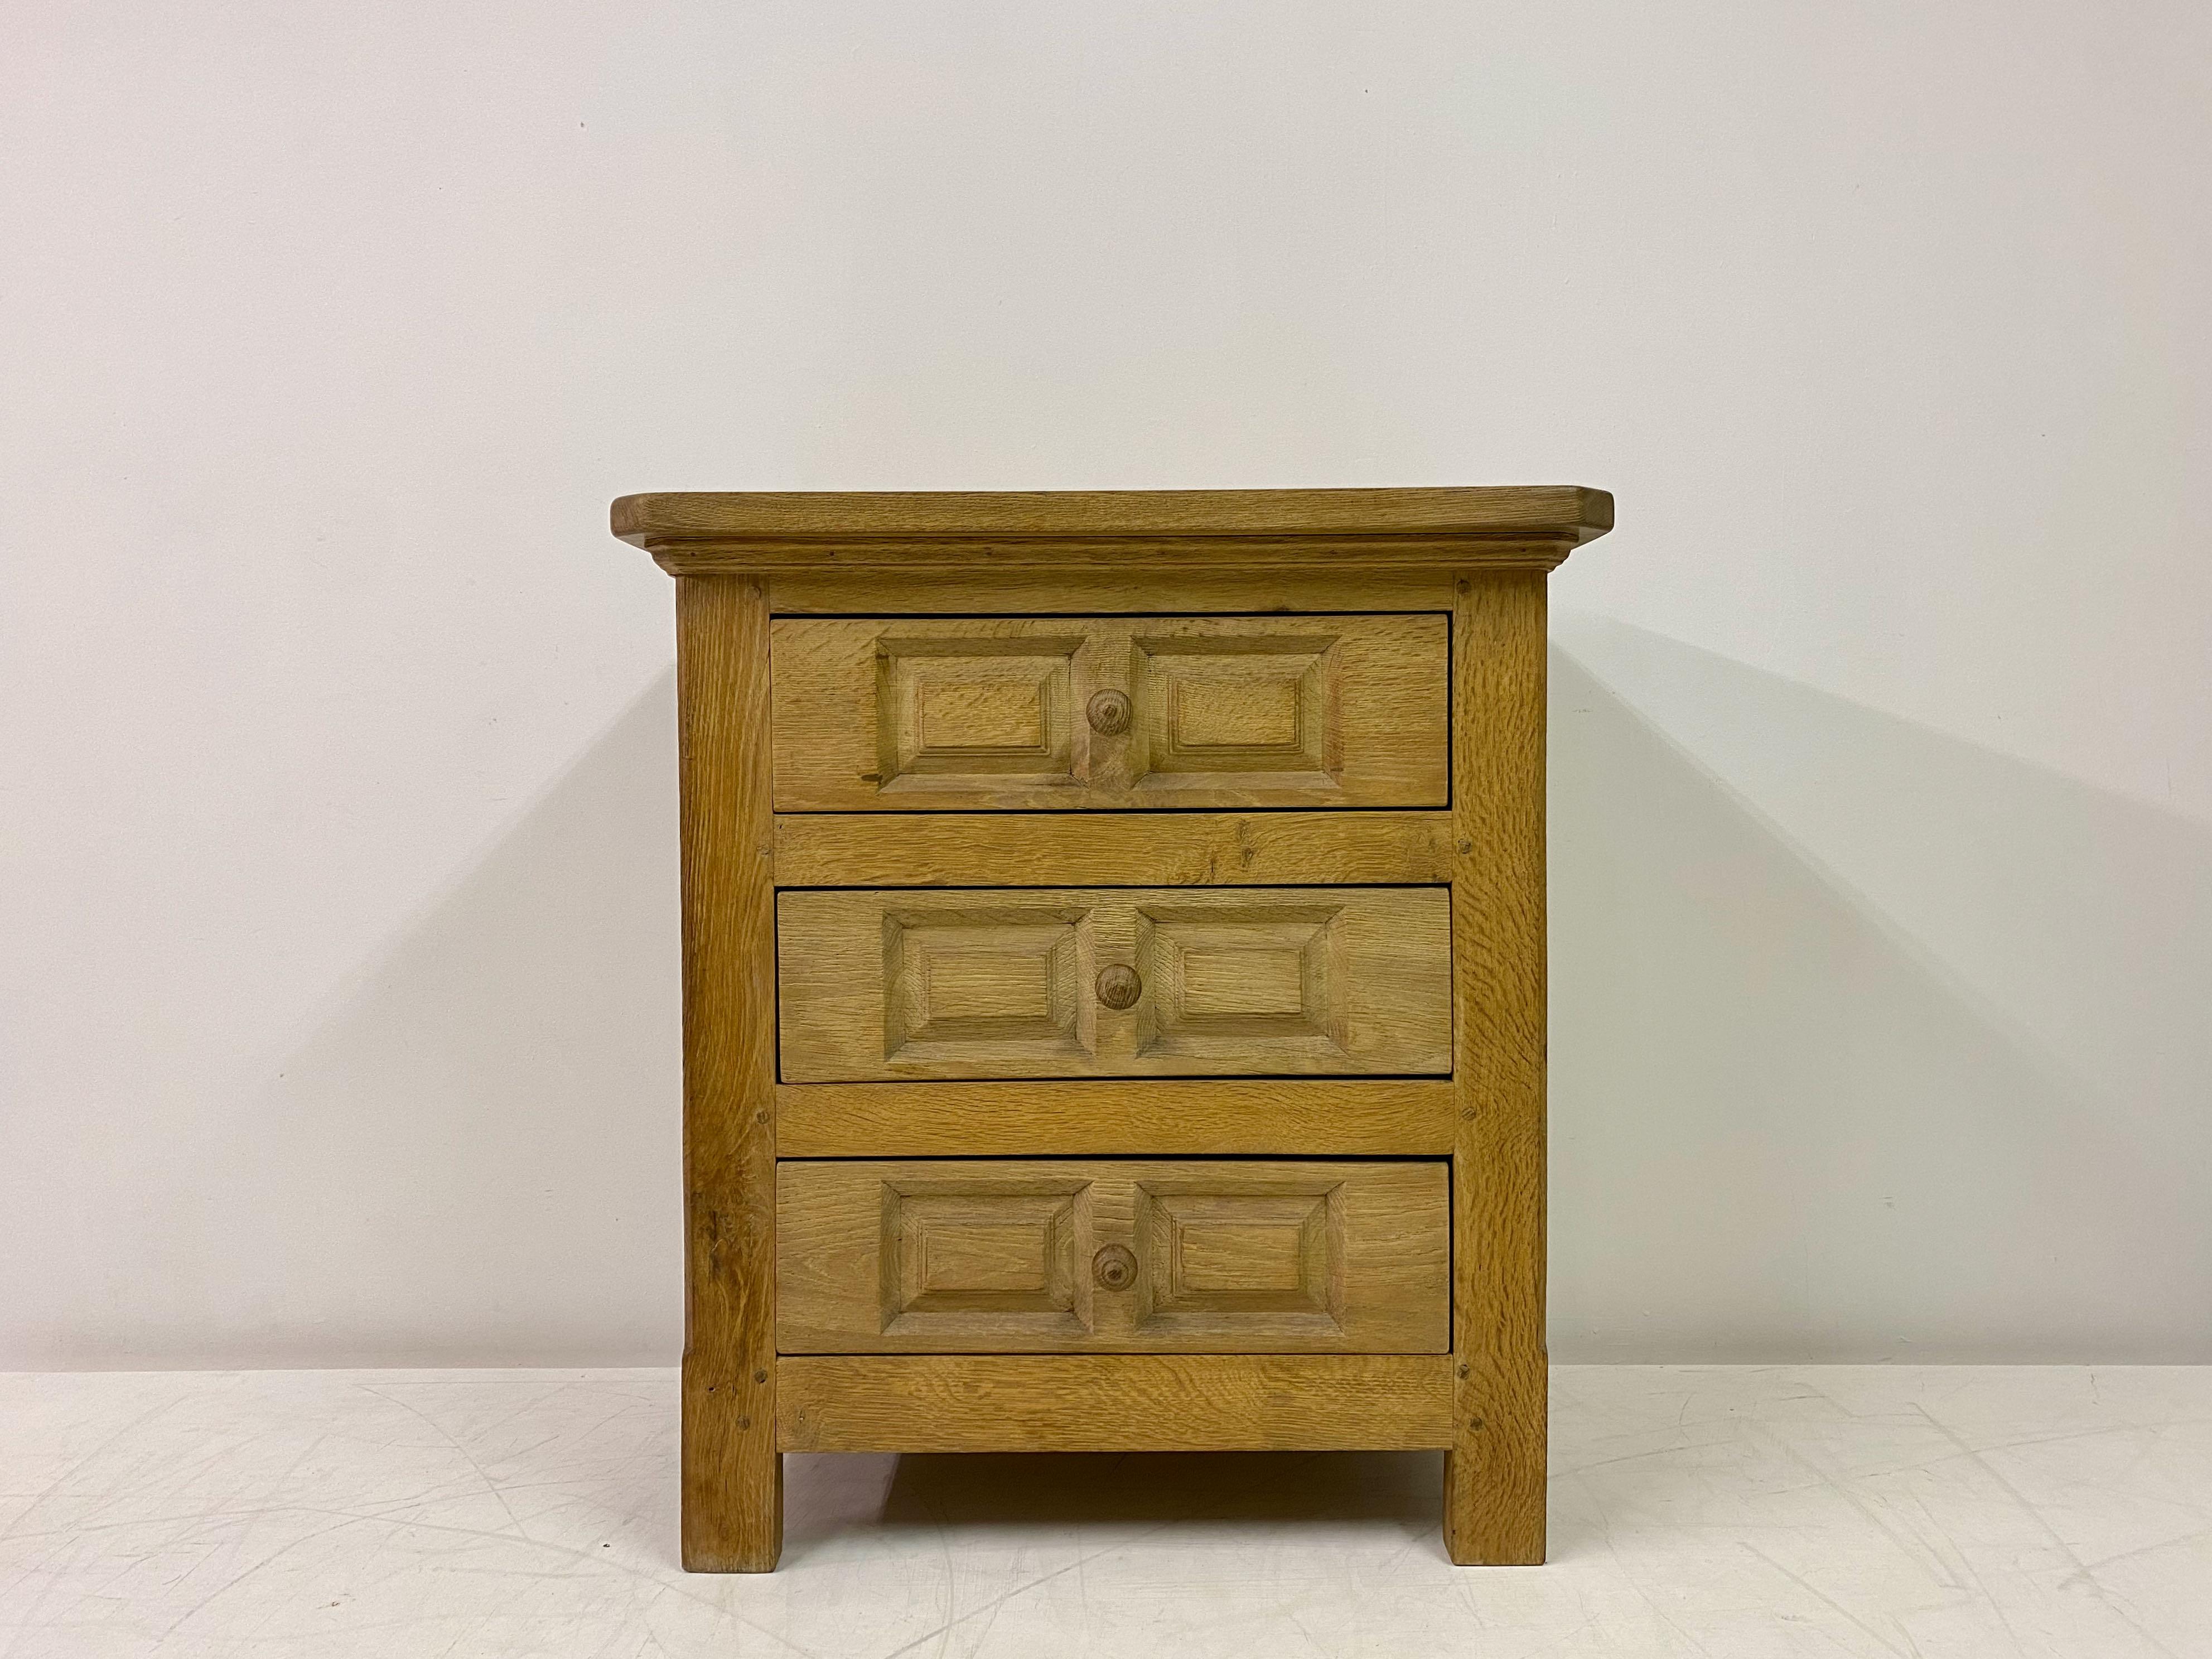 Chest of three drawers

Oak

Probably Belgian mid to late 20th Century.